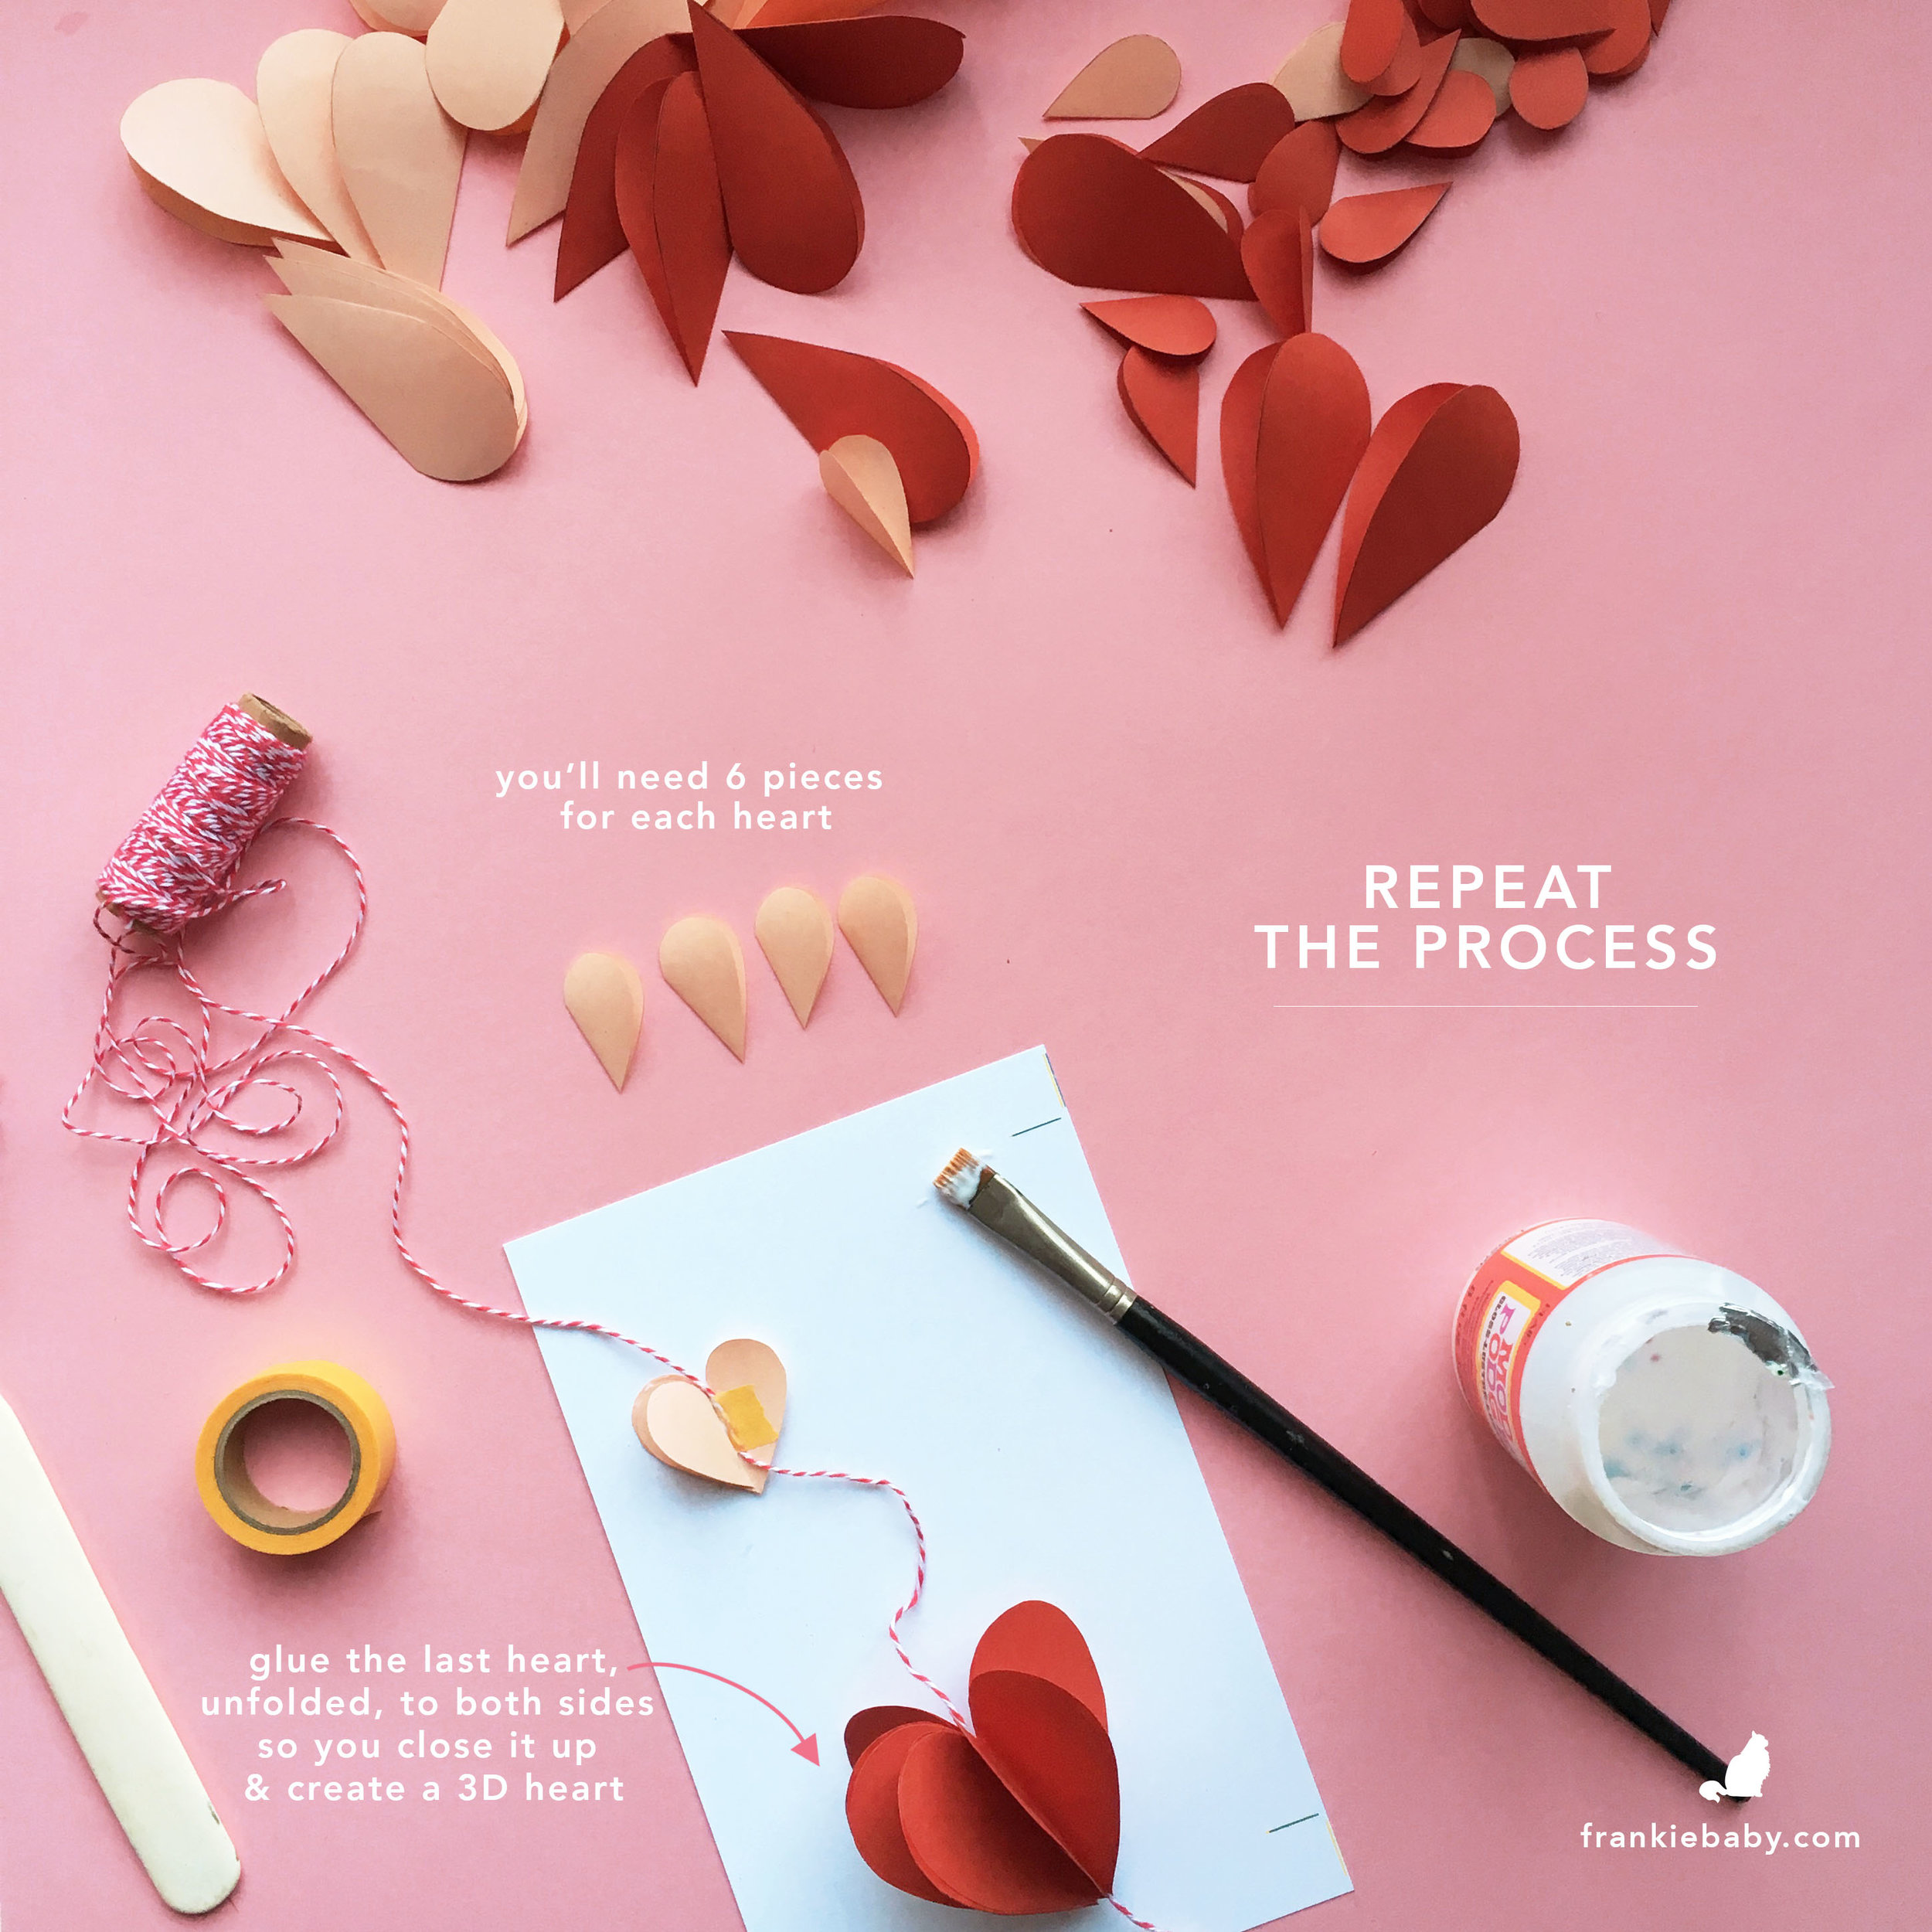 DIY paper garland with hearts - A Wonderful Thought